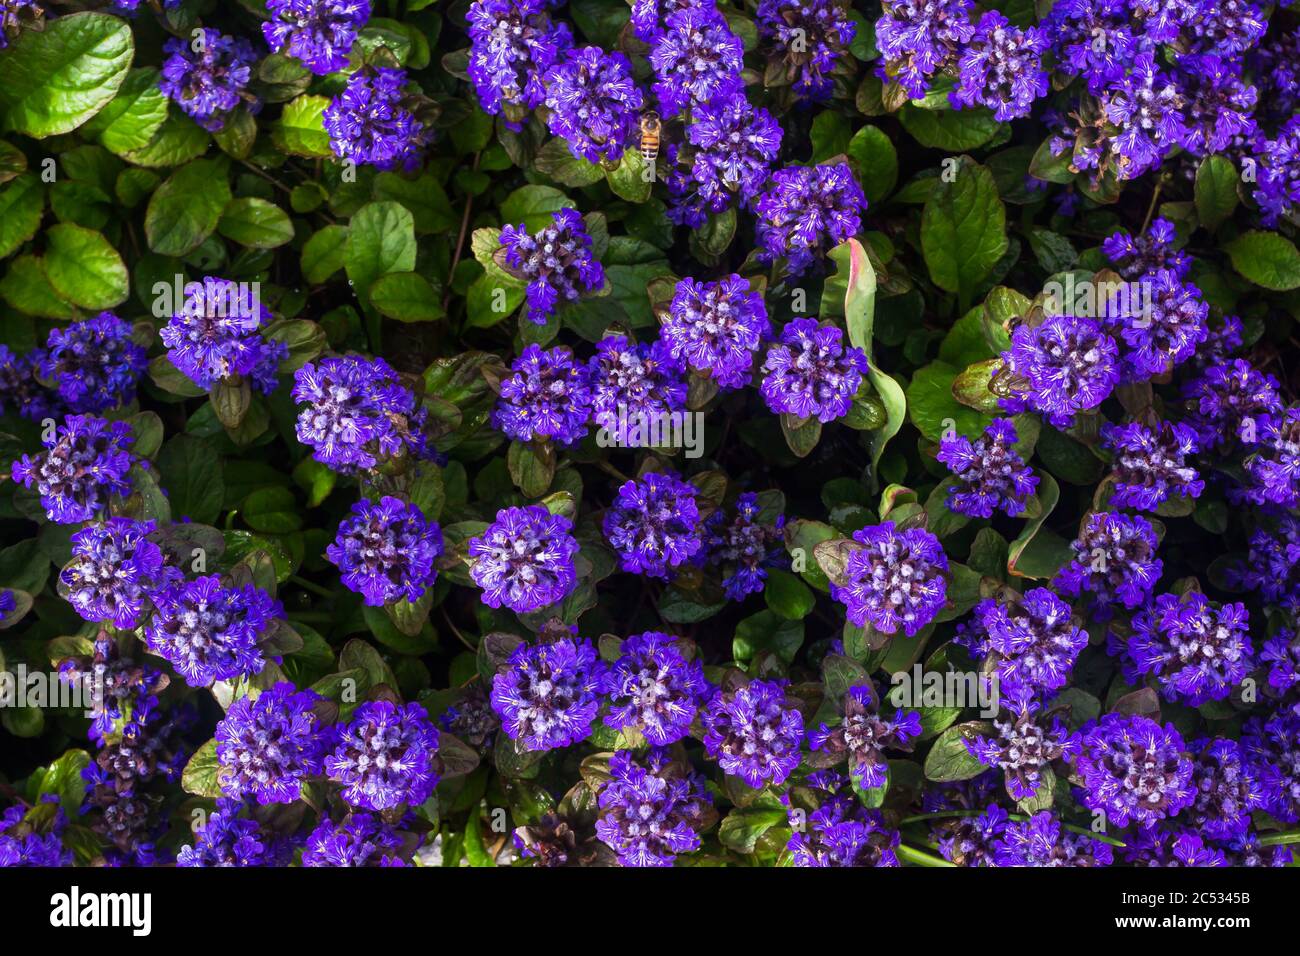 Ajuga reptans It is an herbaceous flowering plant, native to Europe.shot from above, floral blue background Stock Photo